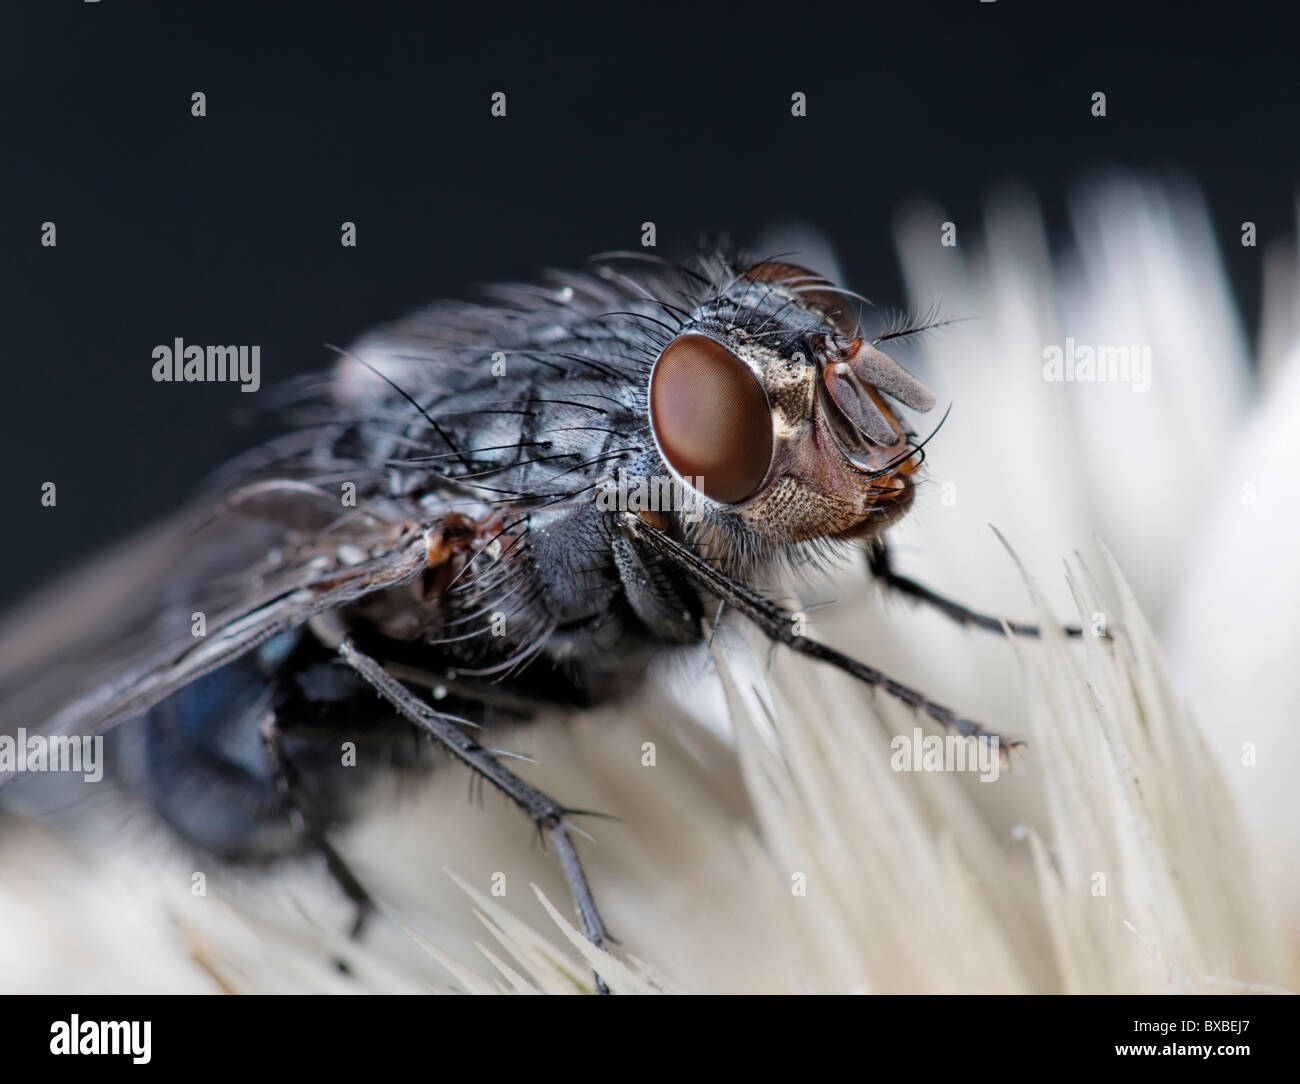 A fly - possibly a Blue Bottle, Calliphora vicina. Stock Photo